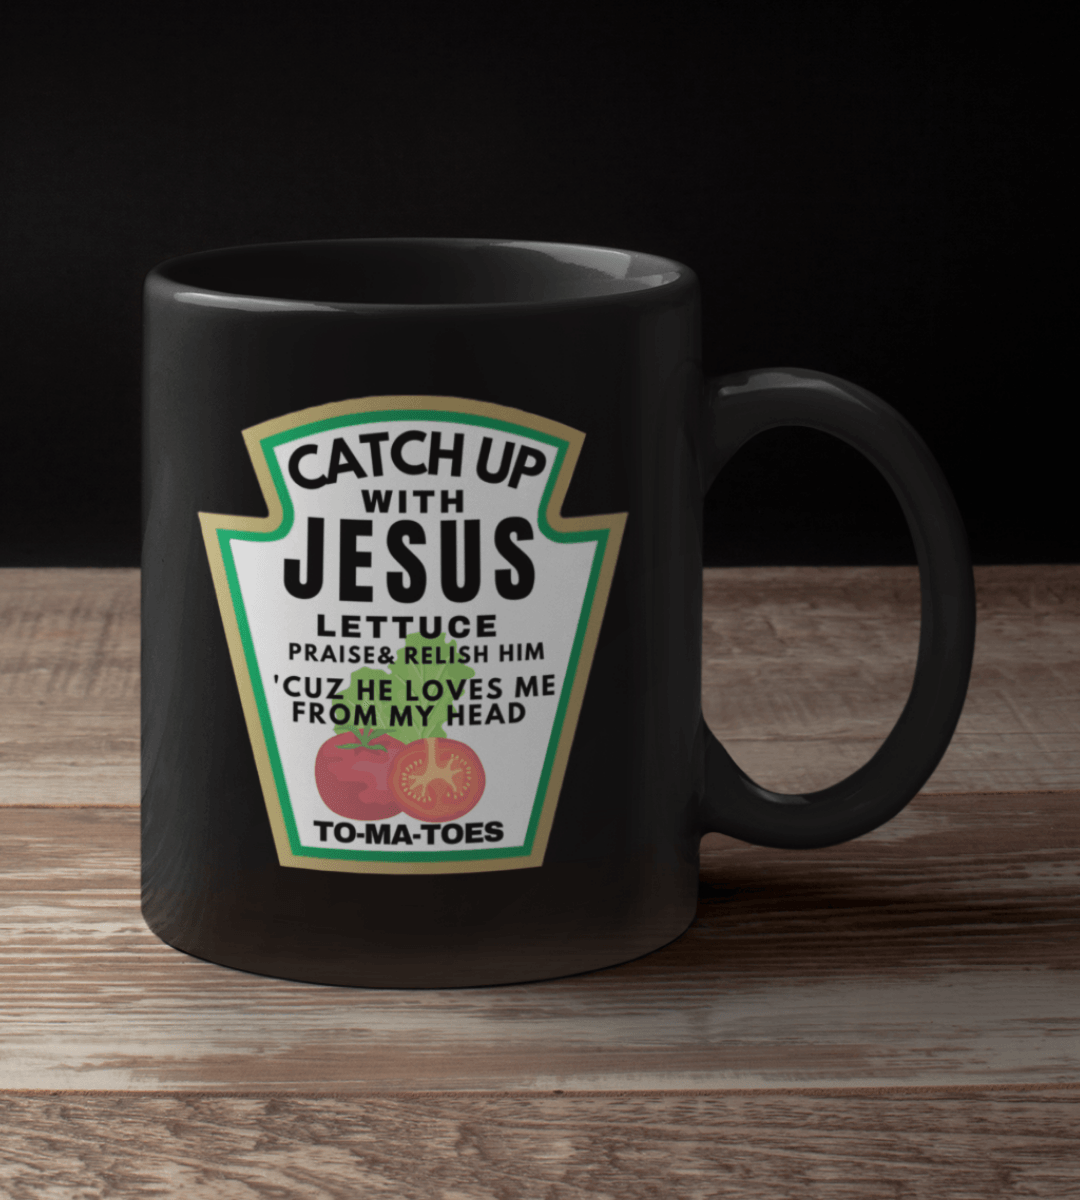 Catch Up with Jesus Lettuce Praise & Relish Him 'Cuz He Loves Me From My Head To-ma-toes Black Mug - TheGivenGet